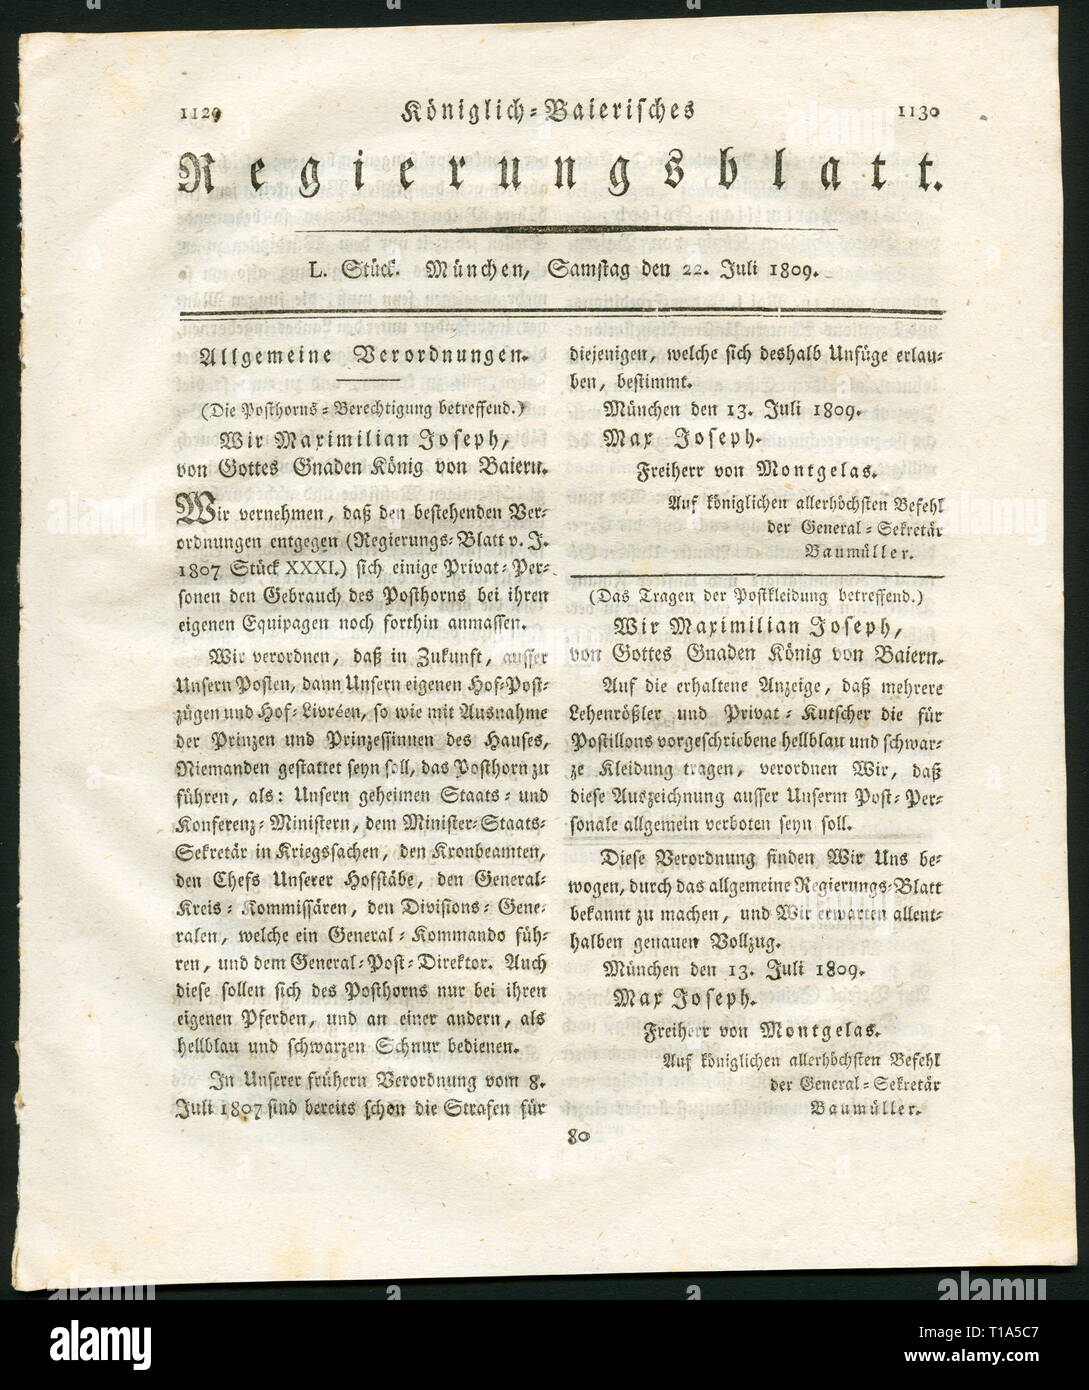 Germany, Bavaria, Munich, historical newspaper with the titl 'Königlich-Baierisches Regierungsblatt ' (Royal-Bavarian goverment newspaper), Munich, published 22.7.1809, Additional-Rights-Clearance-Info-Not-Available Stock Photo